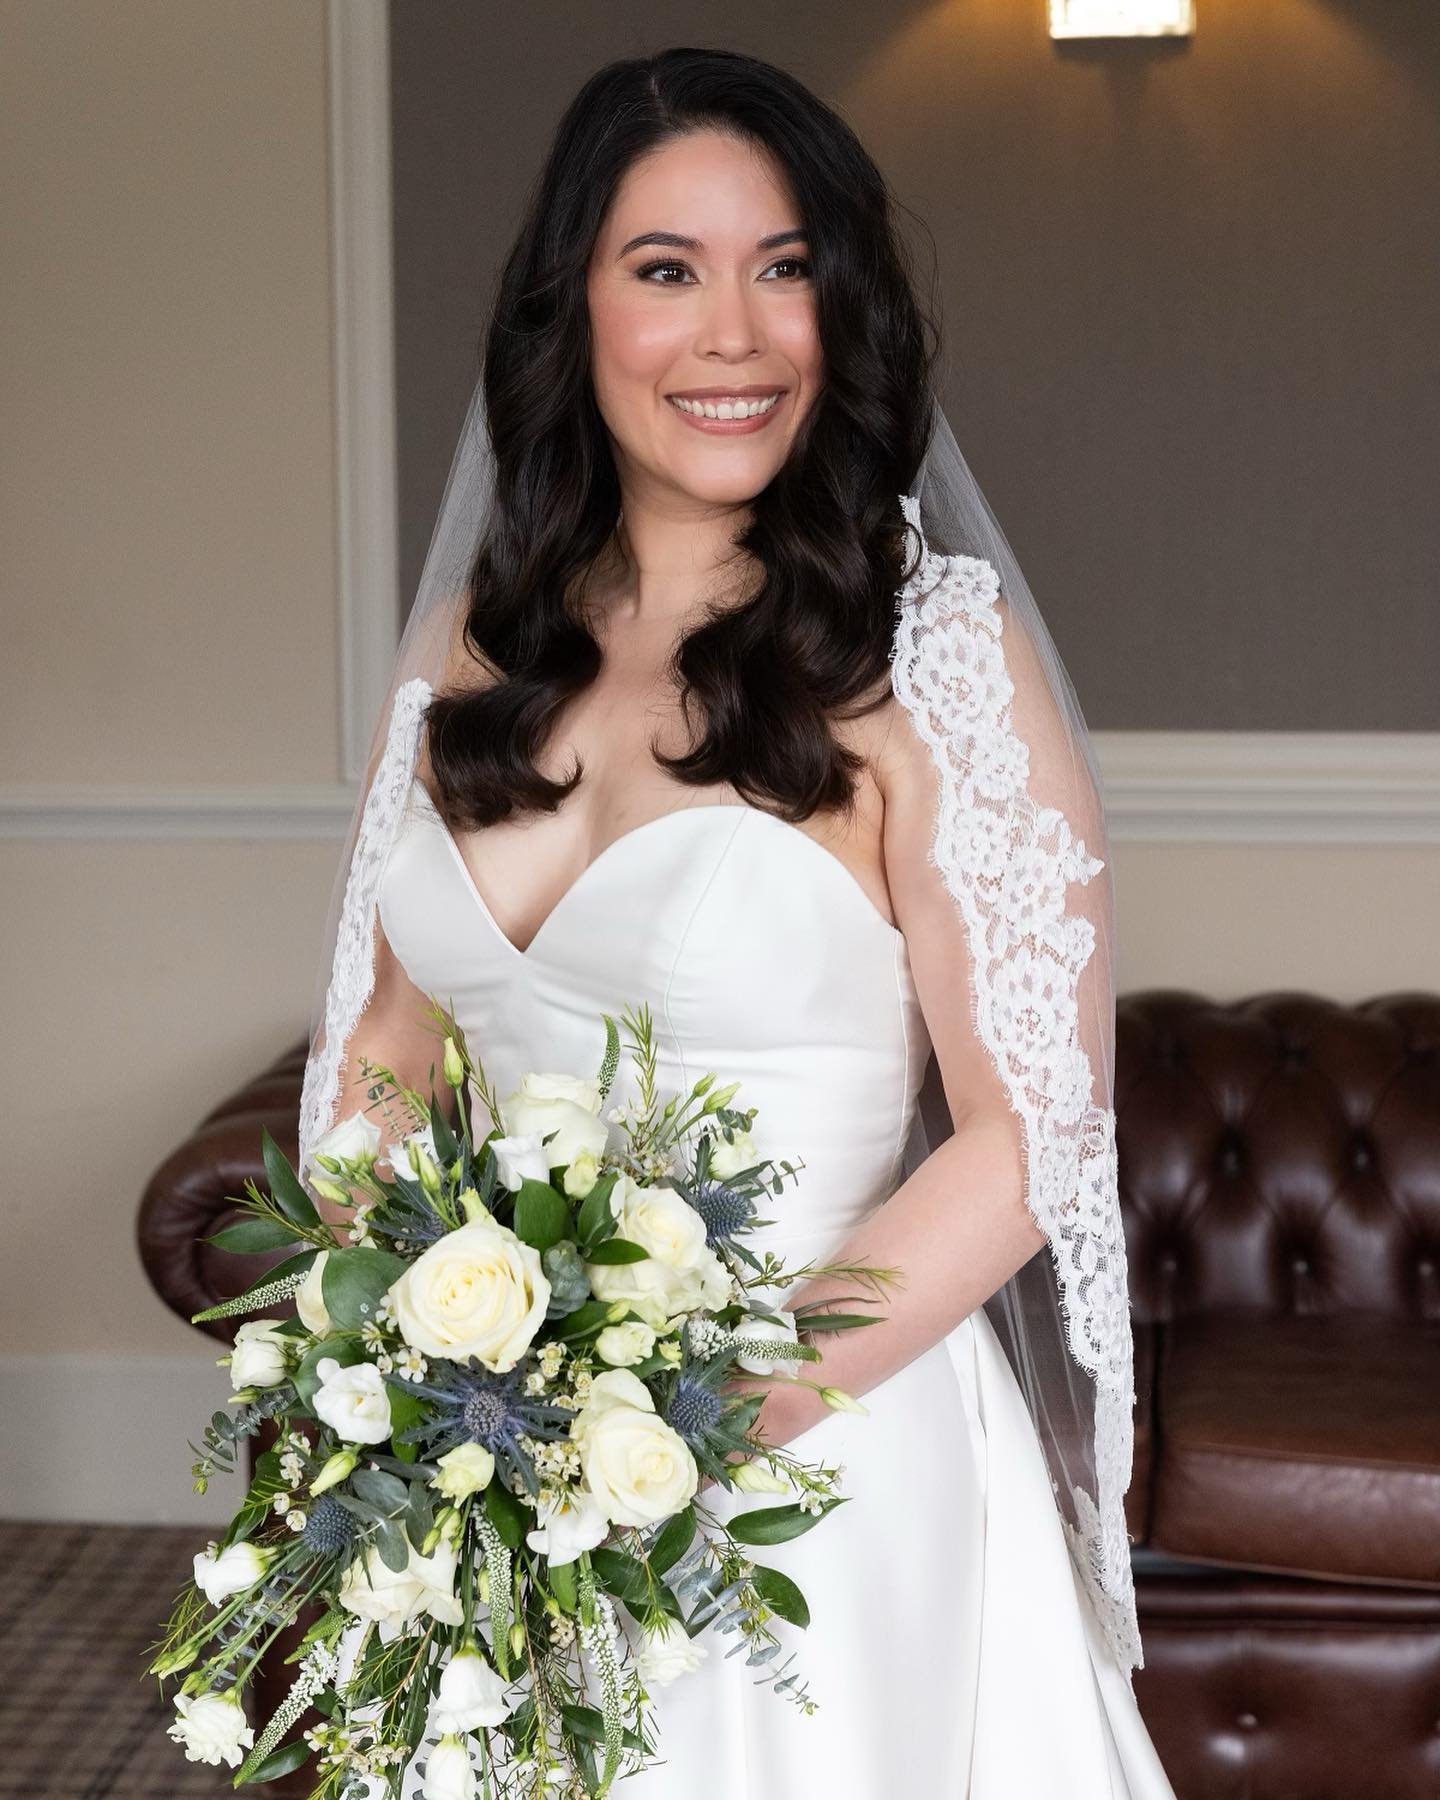 ✨Jennifer✨

Jennifer&rsquo;s beautiful bridal glow wasn&rsquo;t just a result of makeup magic &ndash; it began with her skincare journey to super dewy, hydrated, and smooth skin.

Our pre-wedding dermaplaning facial played a role in Jennifer&rsquo;s 